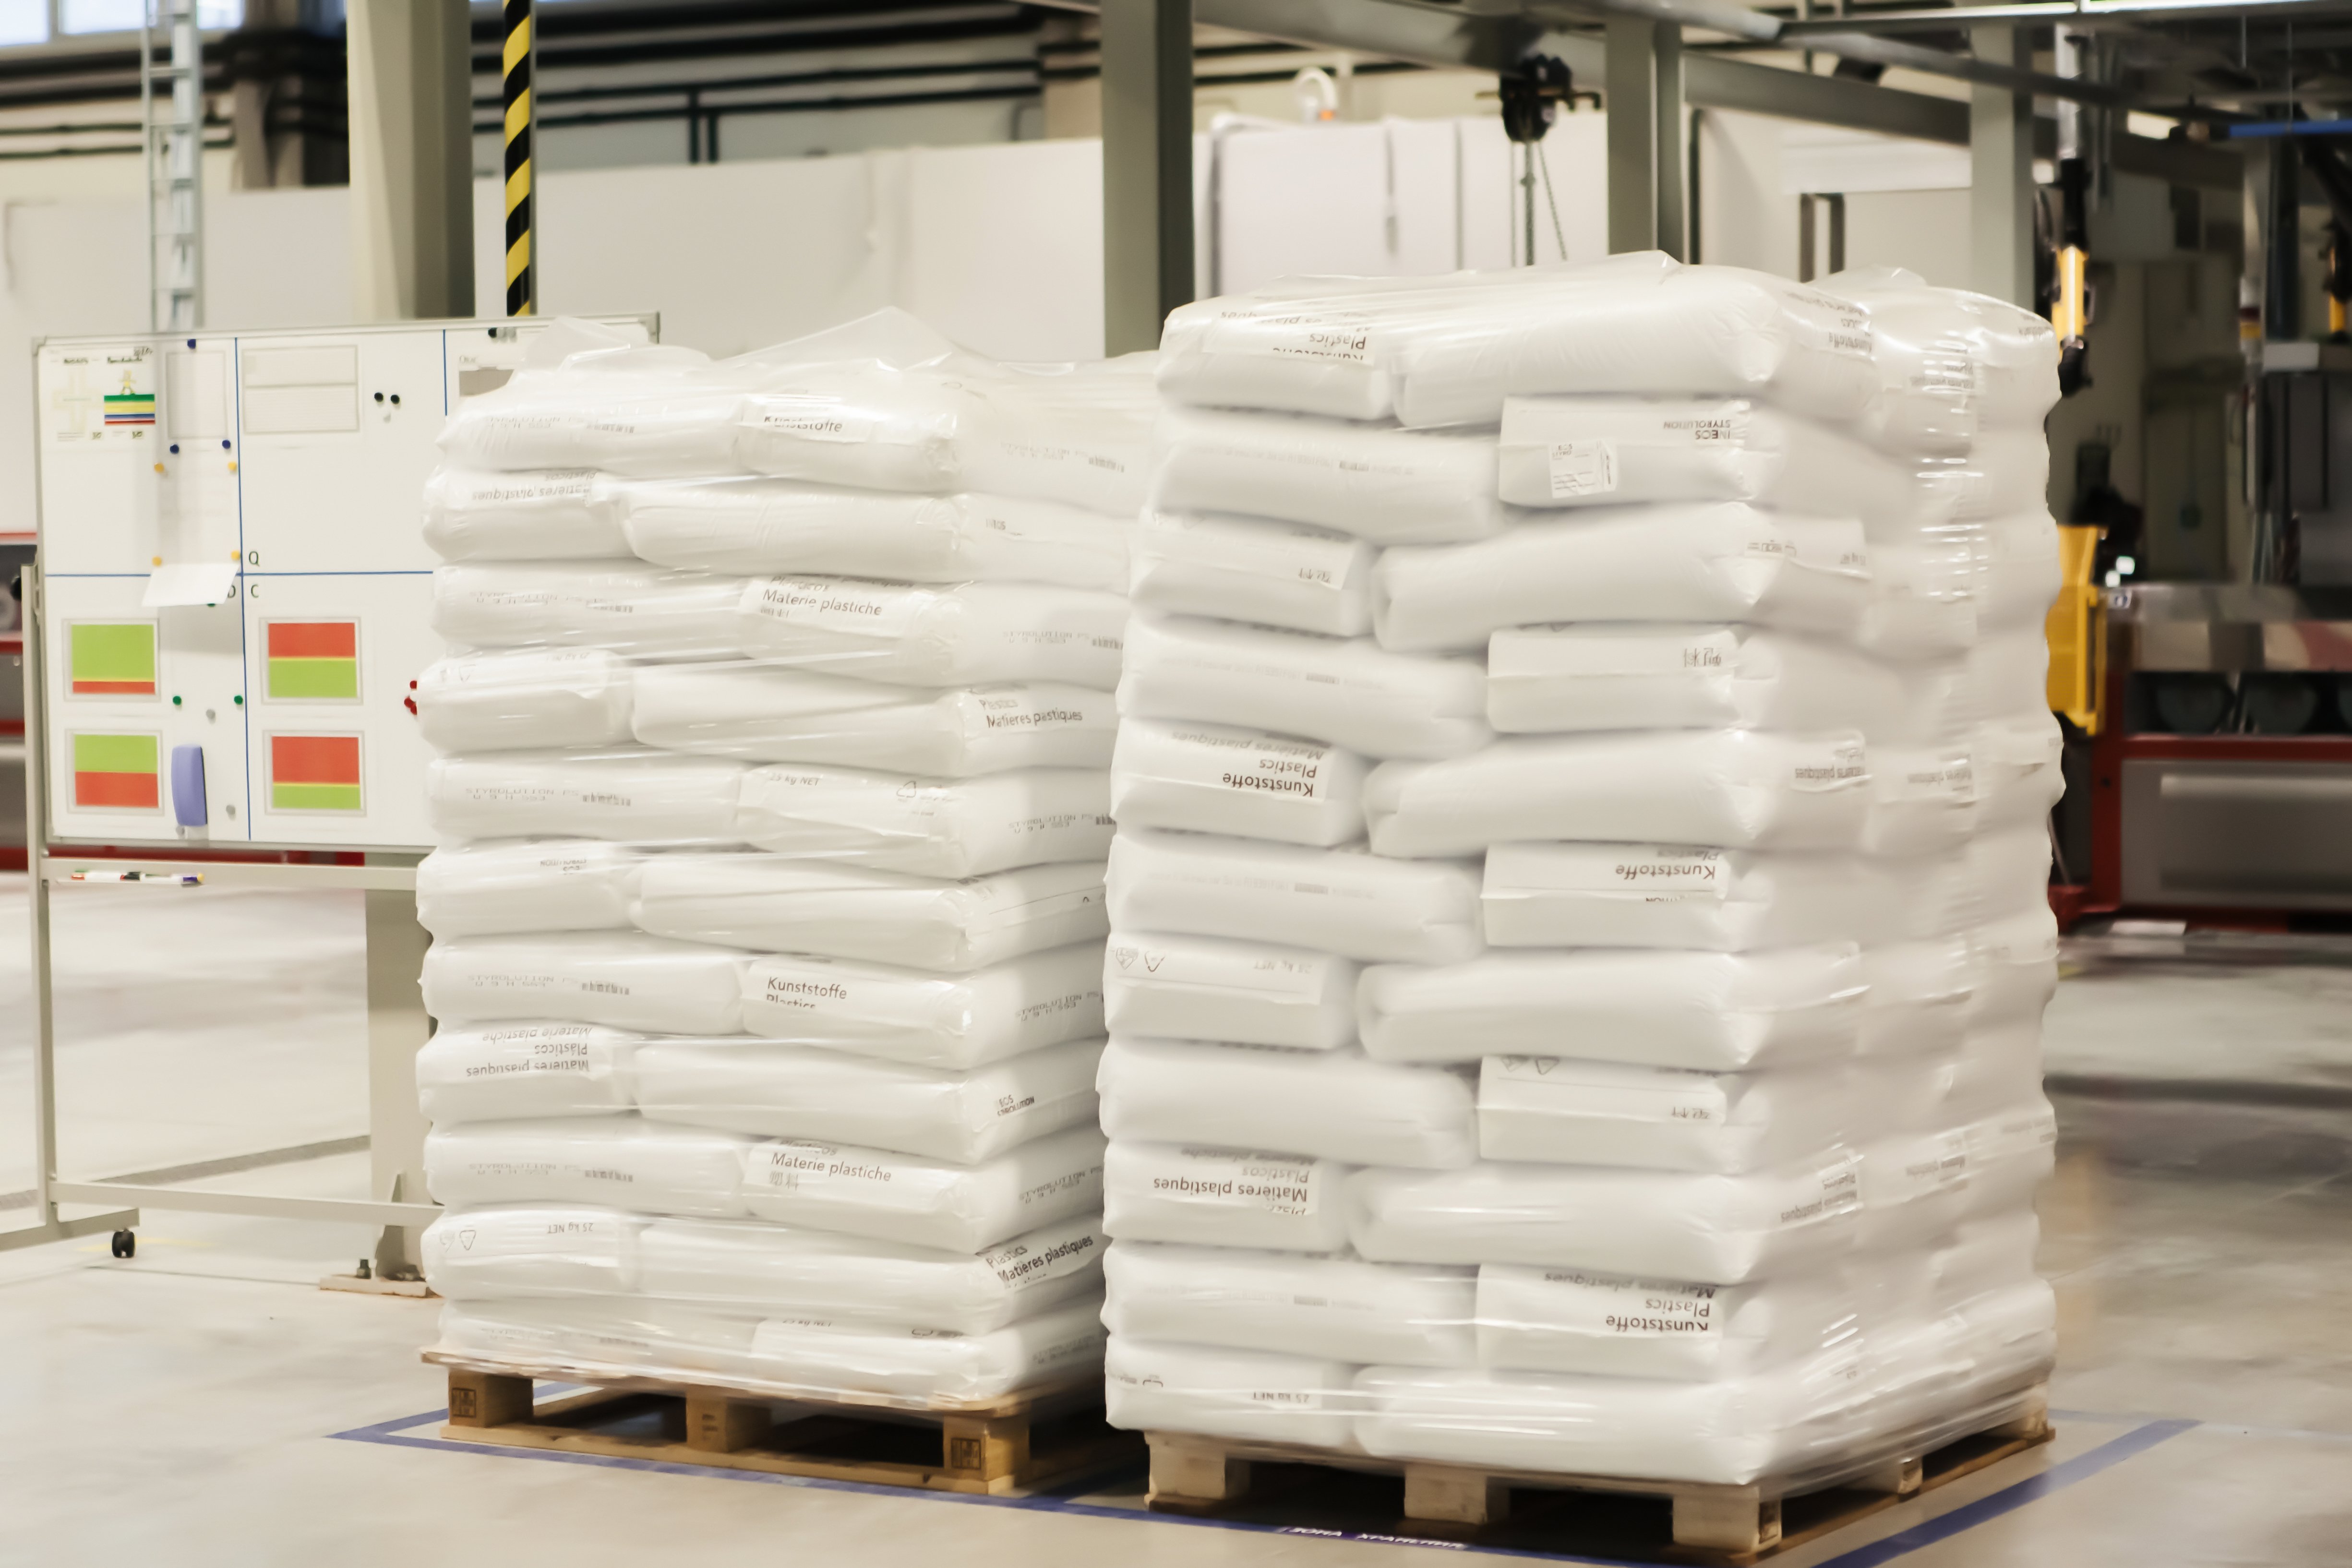 Polythene valve sacks stacked on top of each other on wooden pallets in a warehouse demonstrating the benefits of streamlined packaging and space saving solutions. 